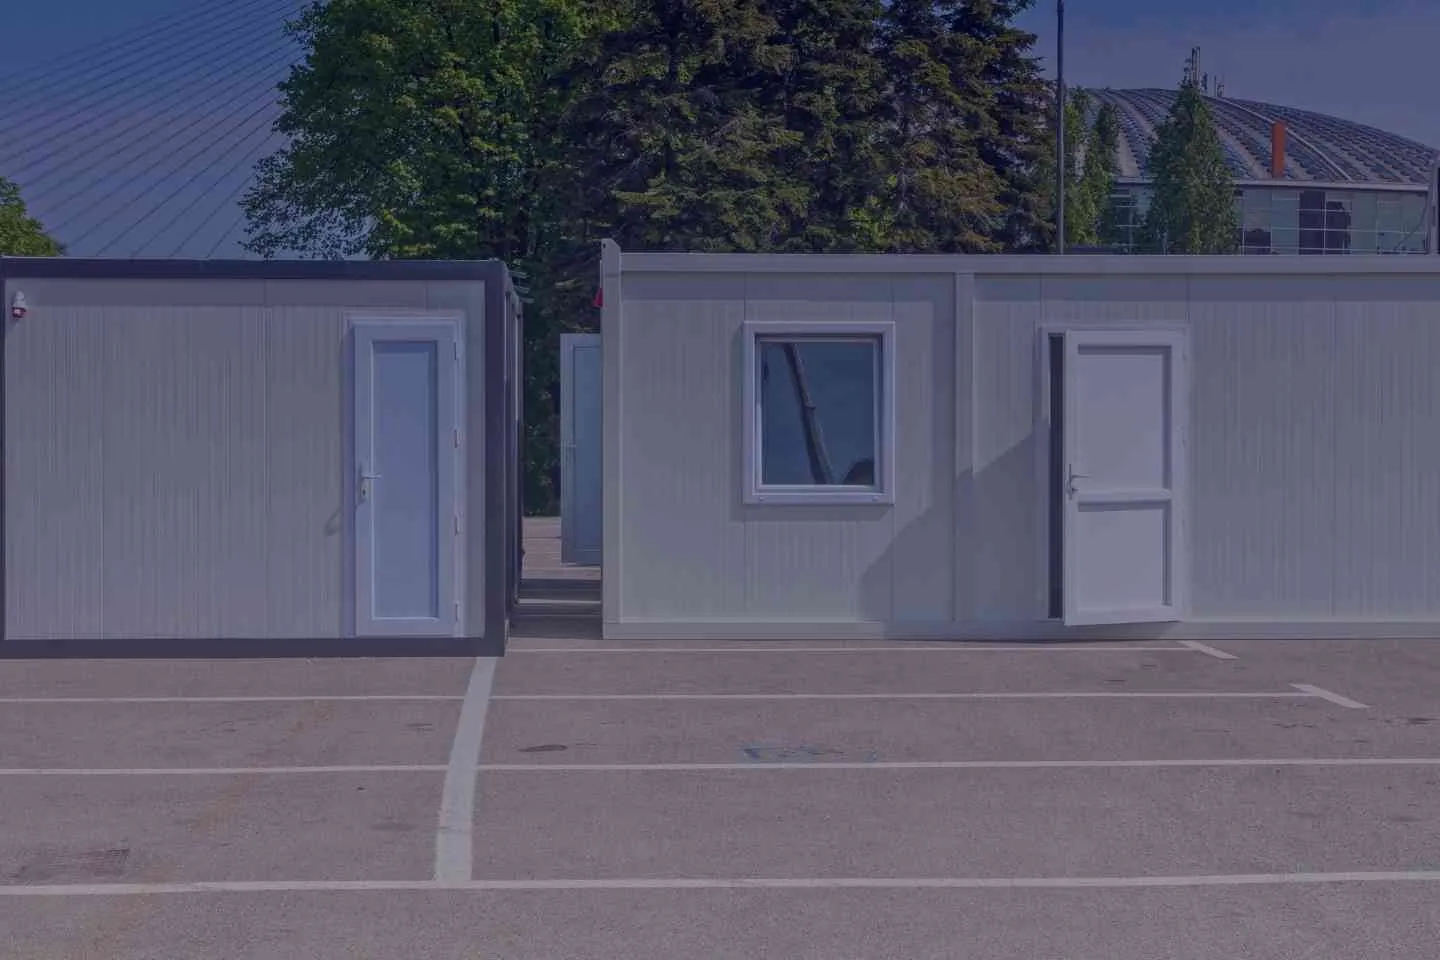 two grey storage containers used as temporary offices on a parking lot